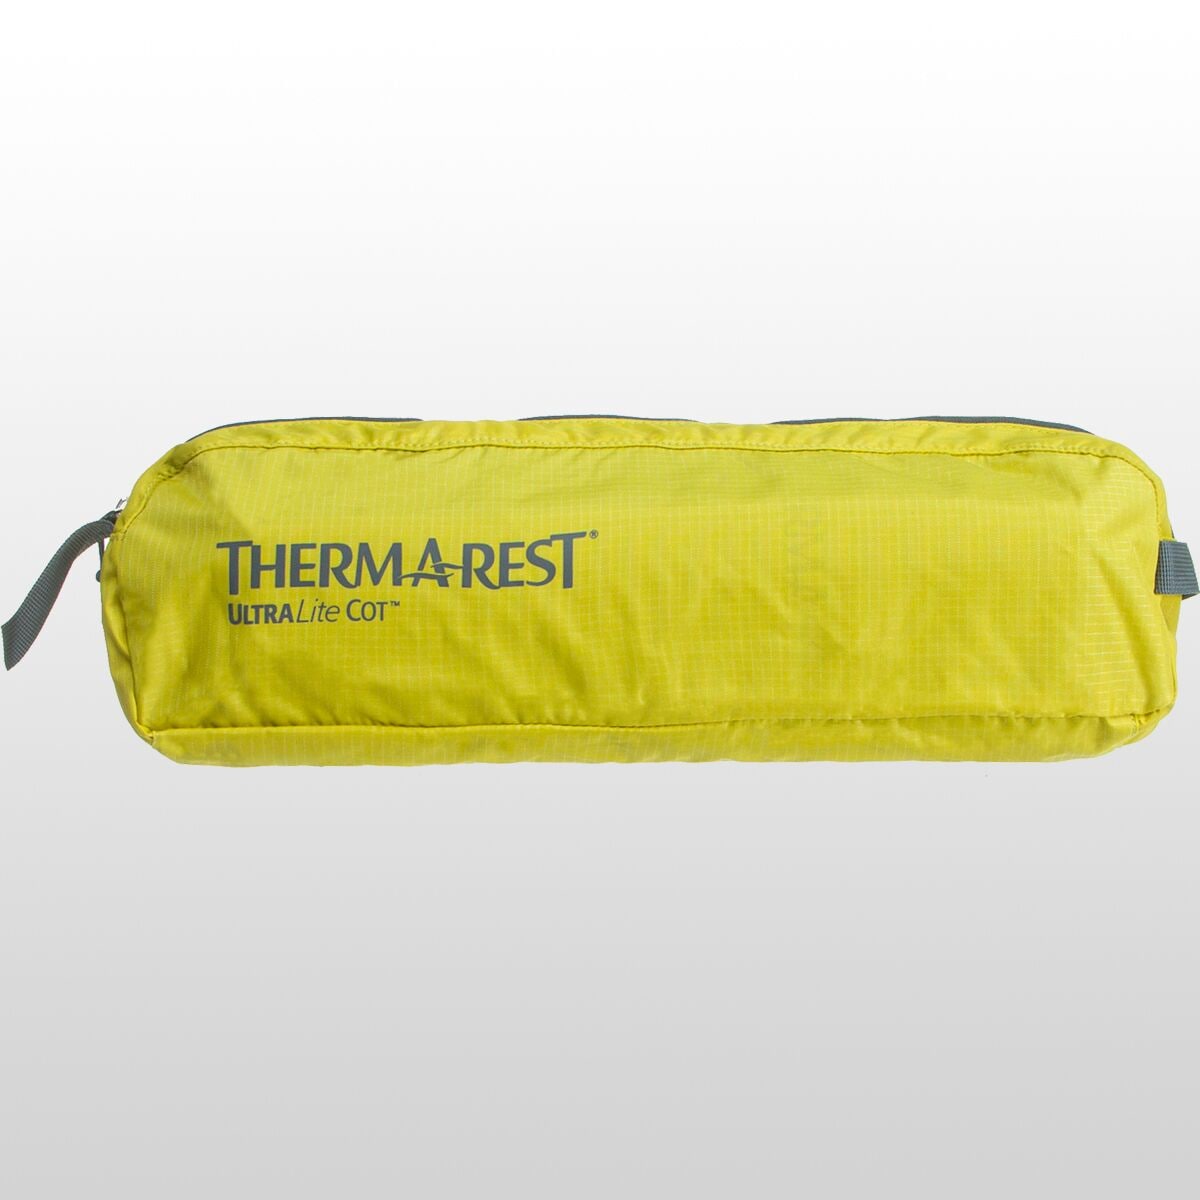  Therm-a-Rest UltraLite Cot - Hike & Camp